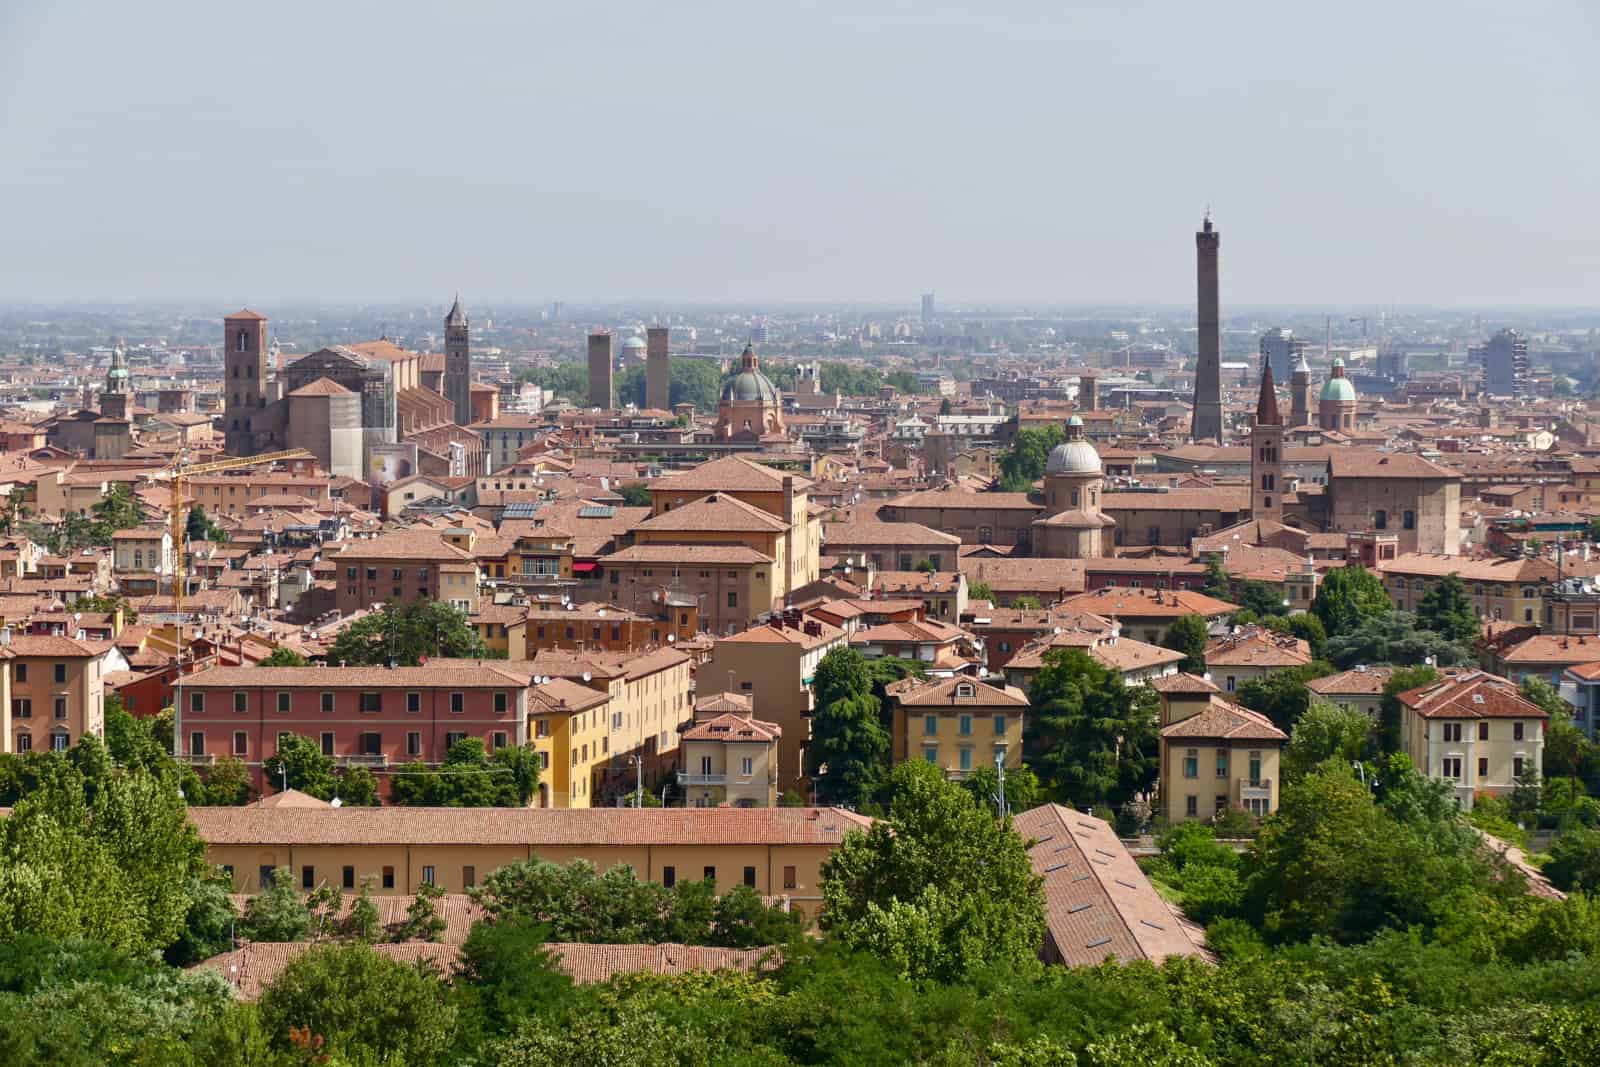 View of Bologna's orange stones structures and six stone towers, from San Michele In Bosco, Italy